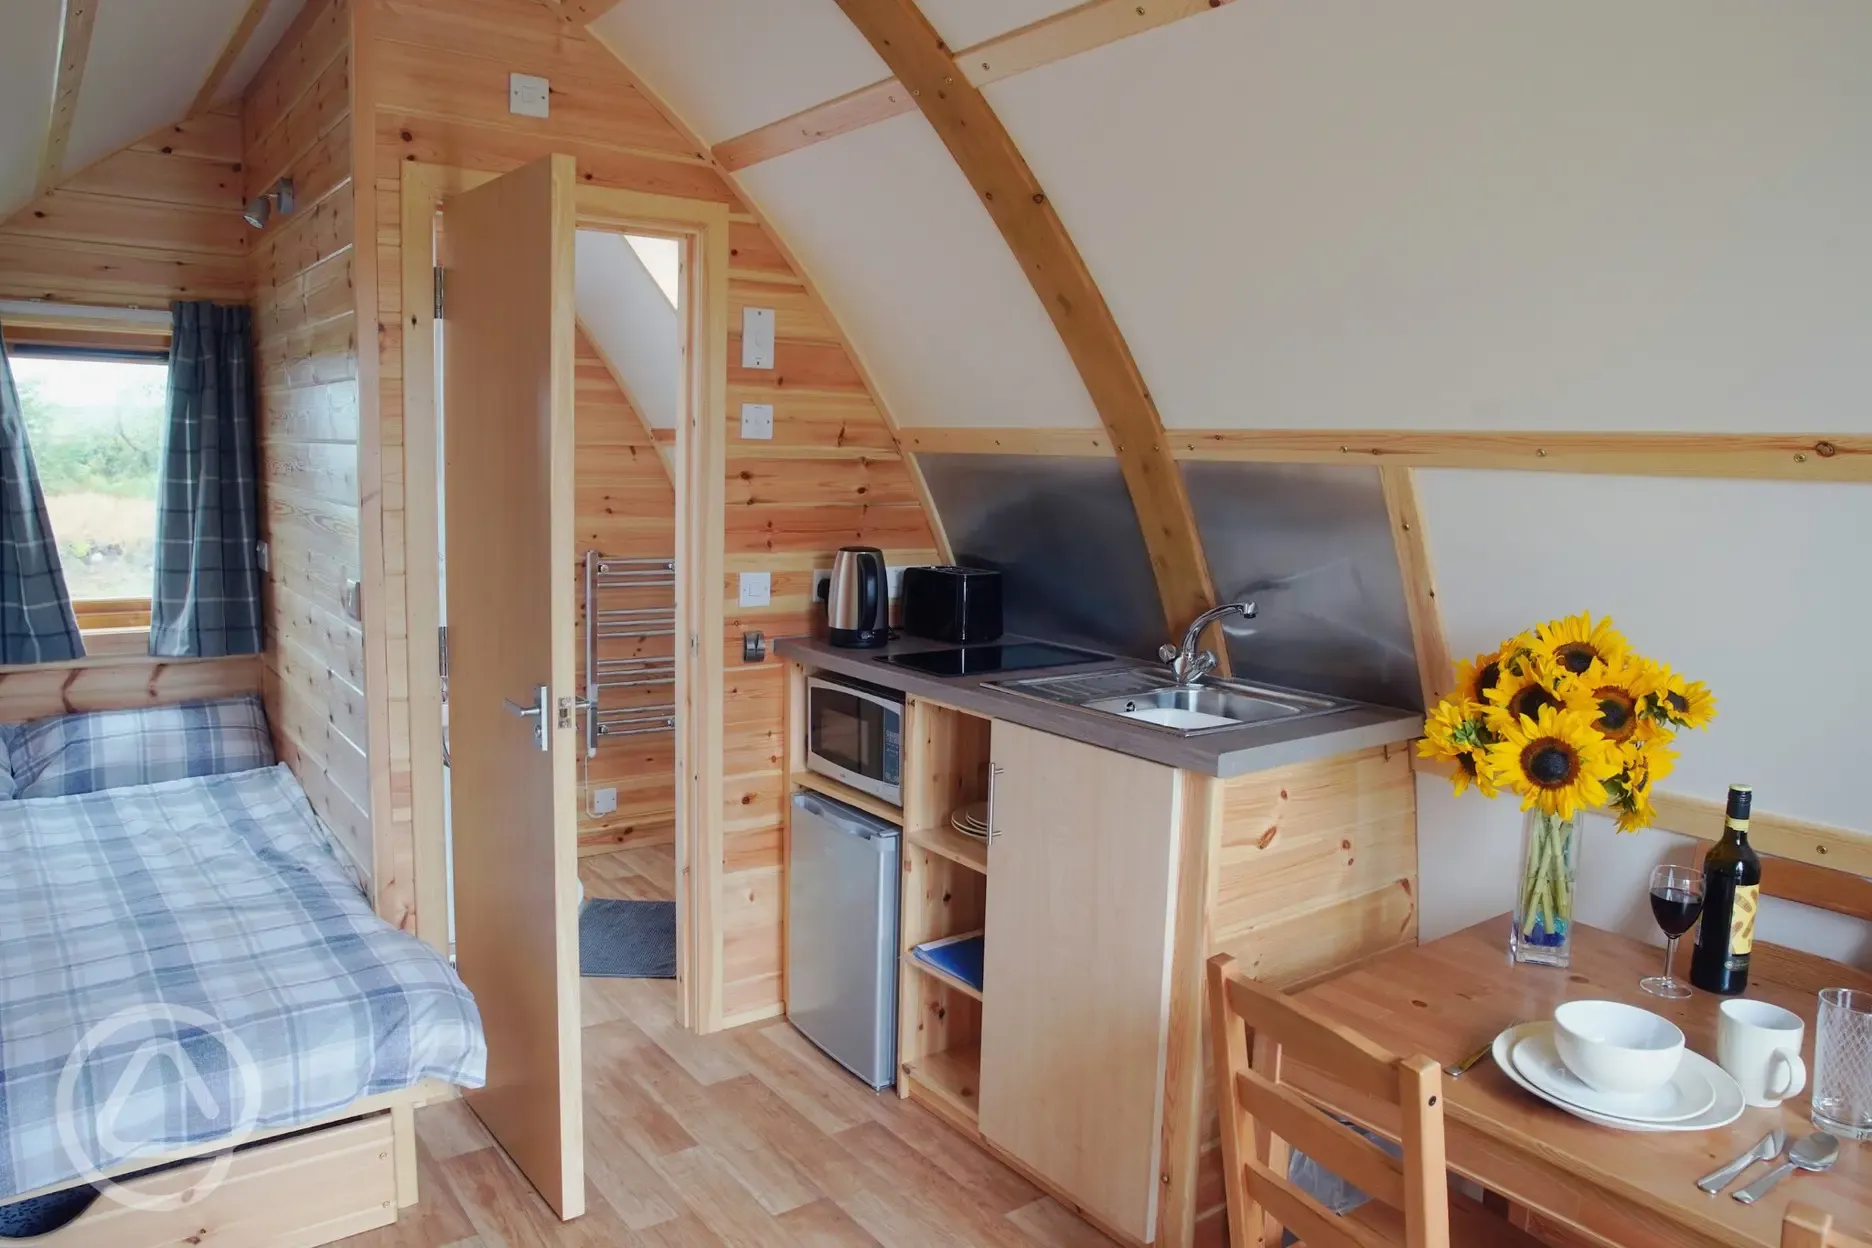 Wigwam pod kitchenette and dining area